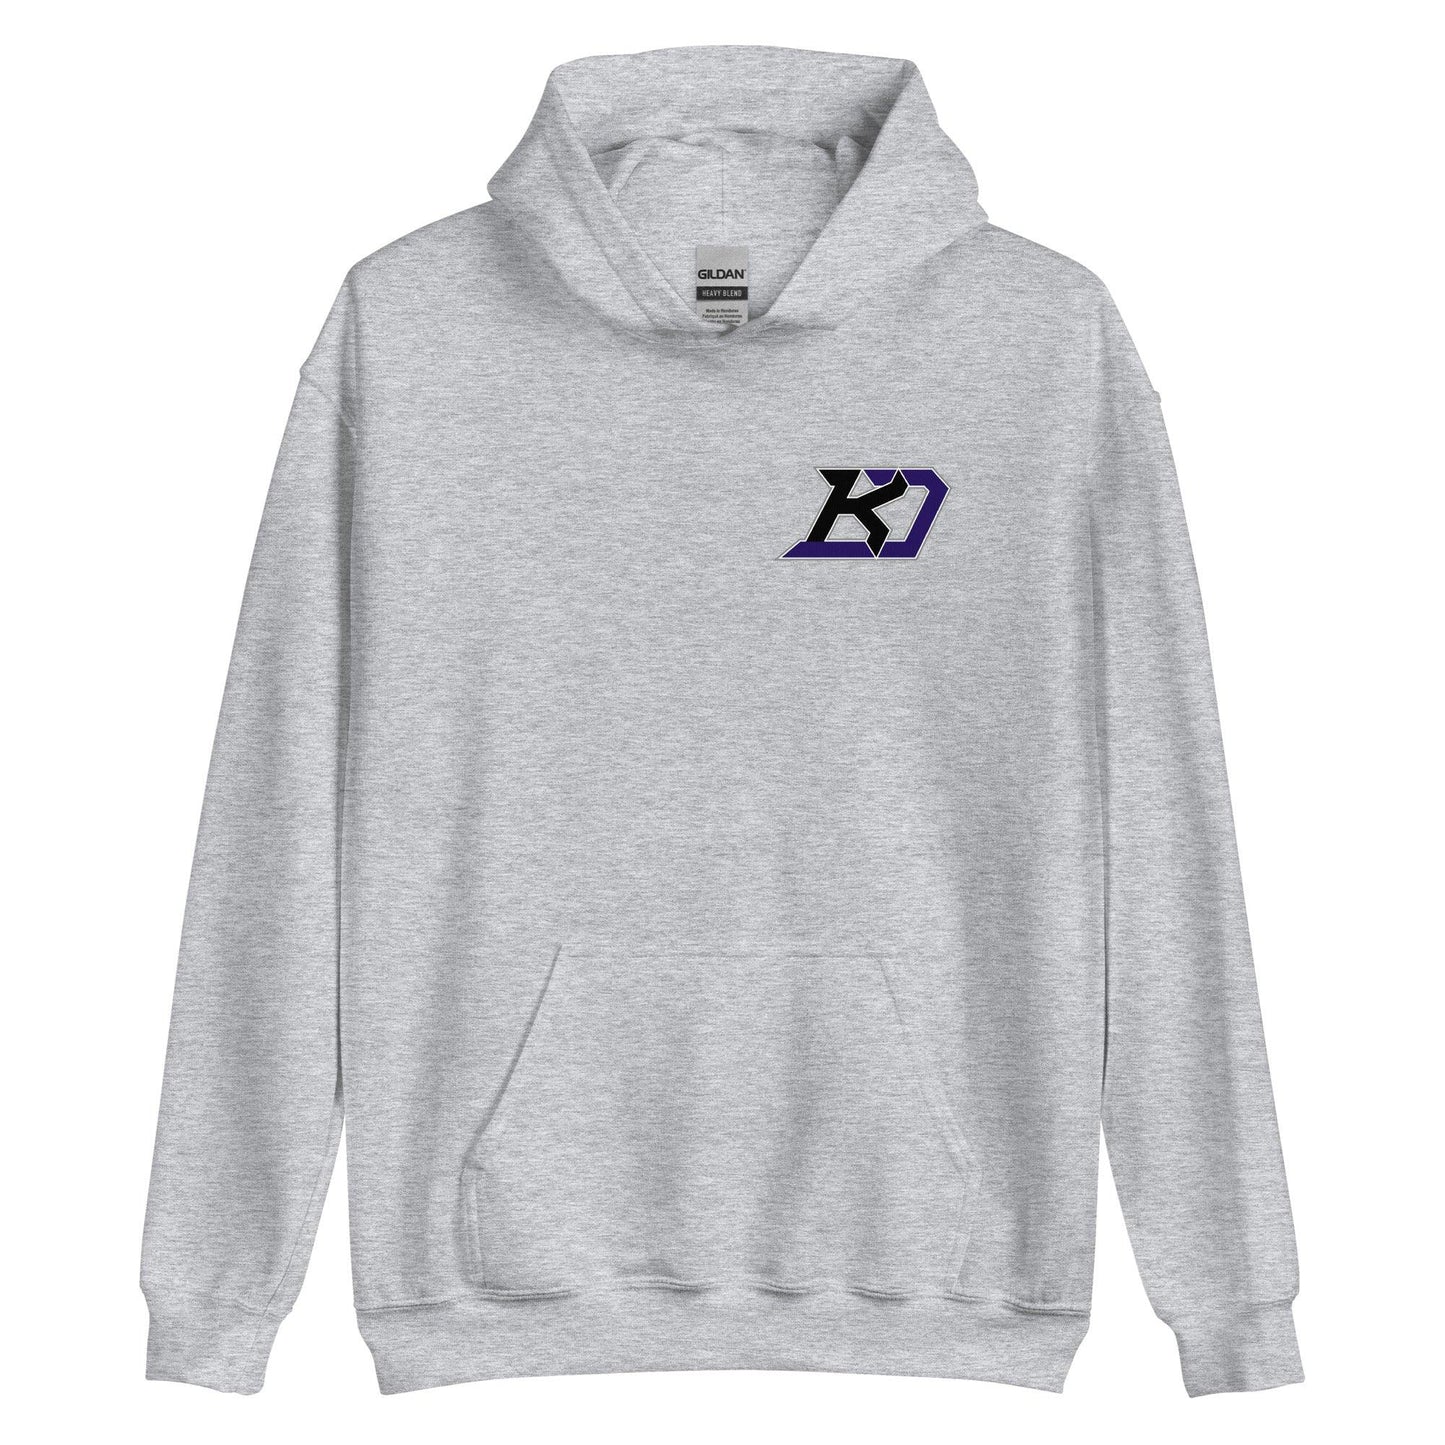 Kyle Datres “Signature” Hoodie - Fan Arch